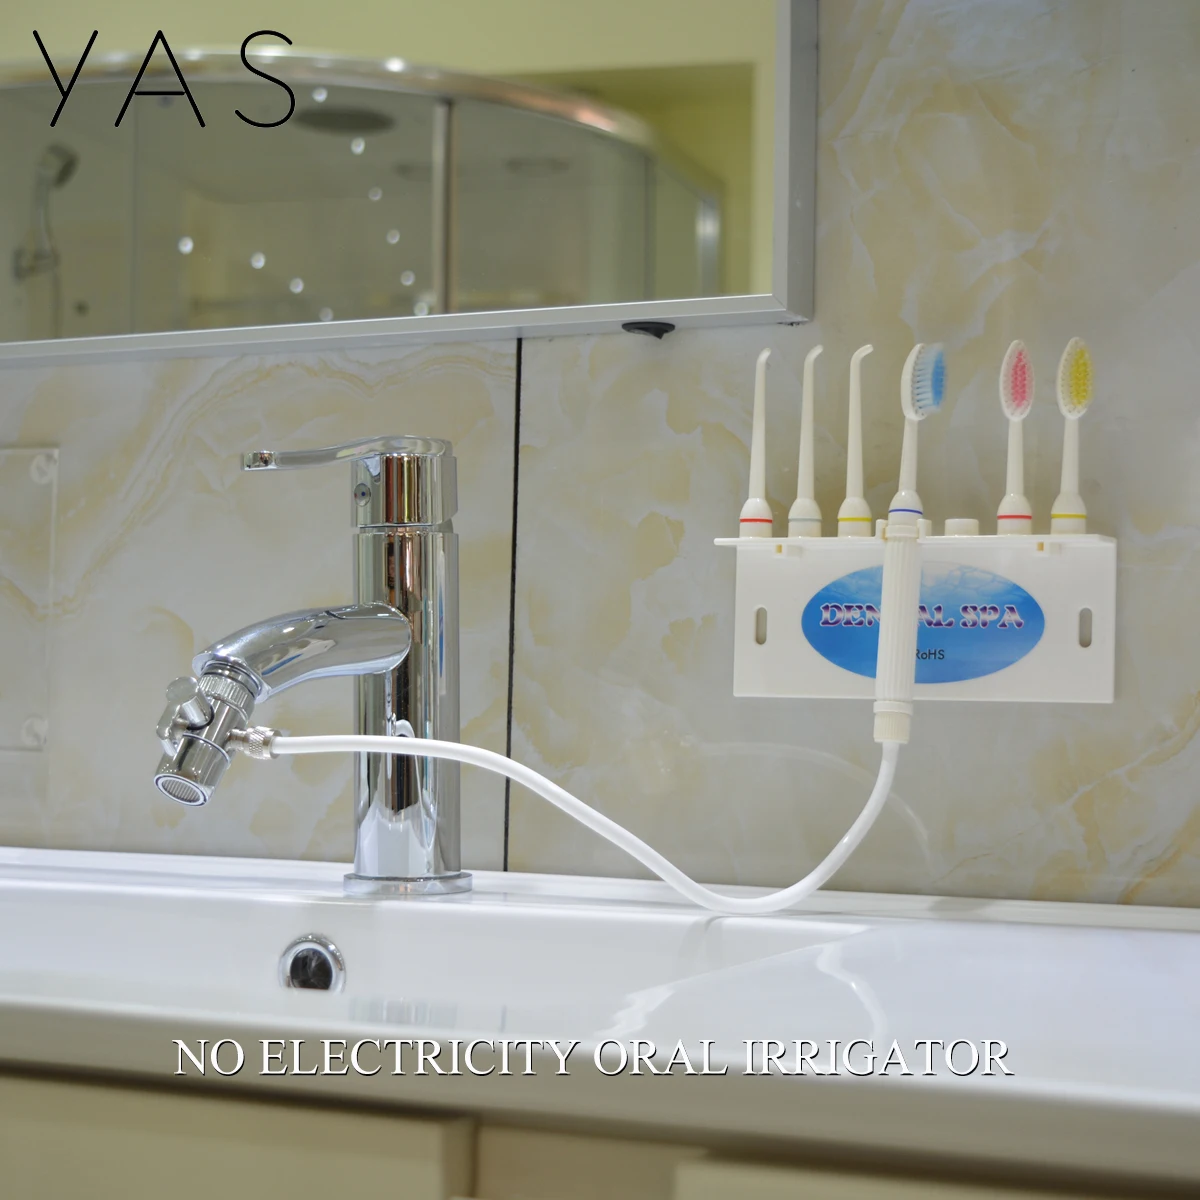 

YAS Quality Faucet Water Dental Flosser Oral Irrigator Jet Interdental Brush Tooth Toothbrush Cleaning SPA Cleaner Whitening